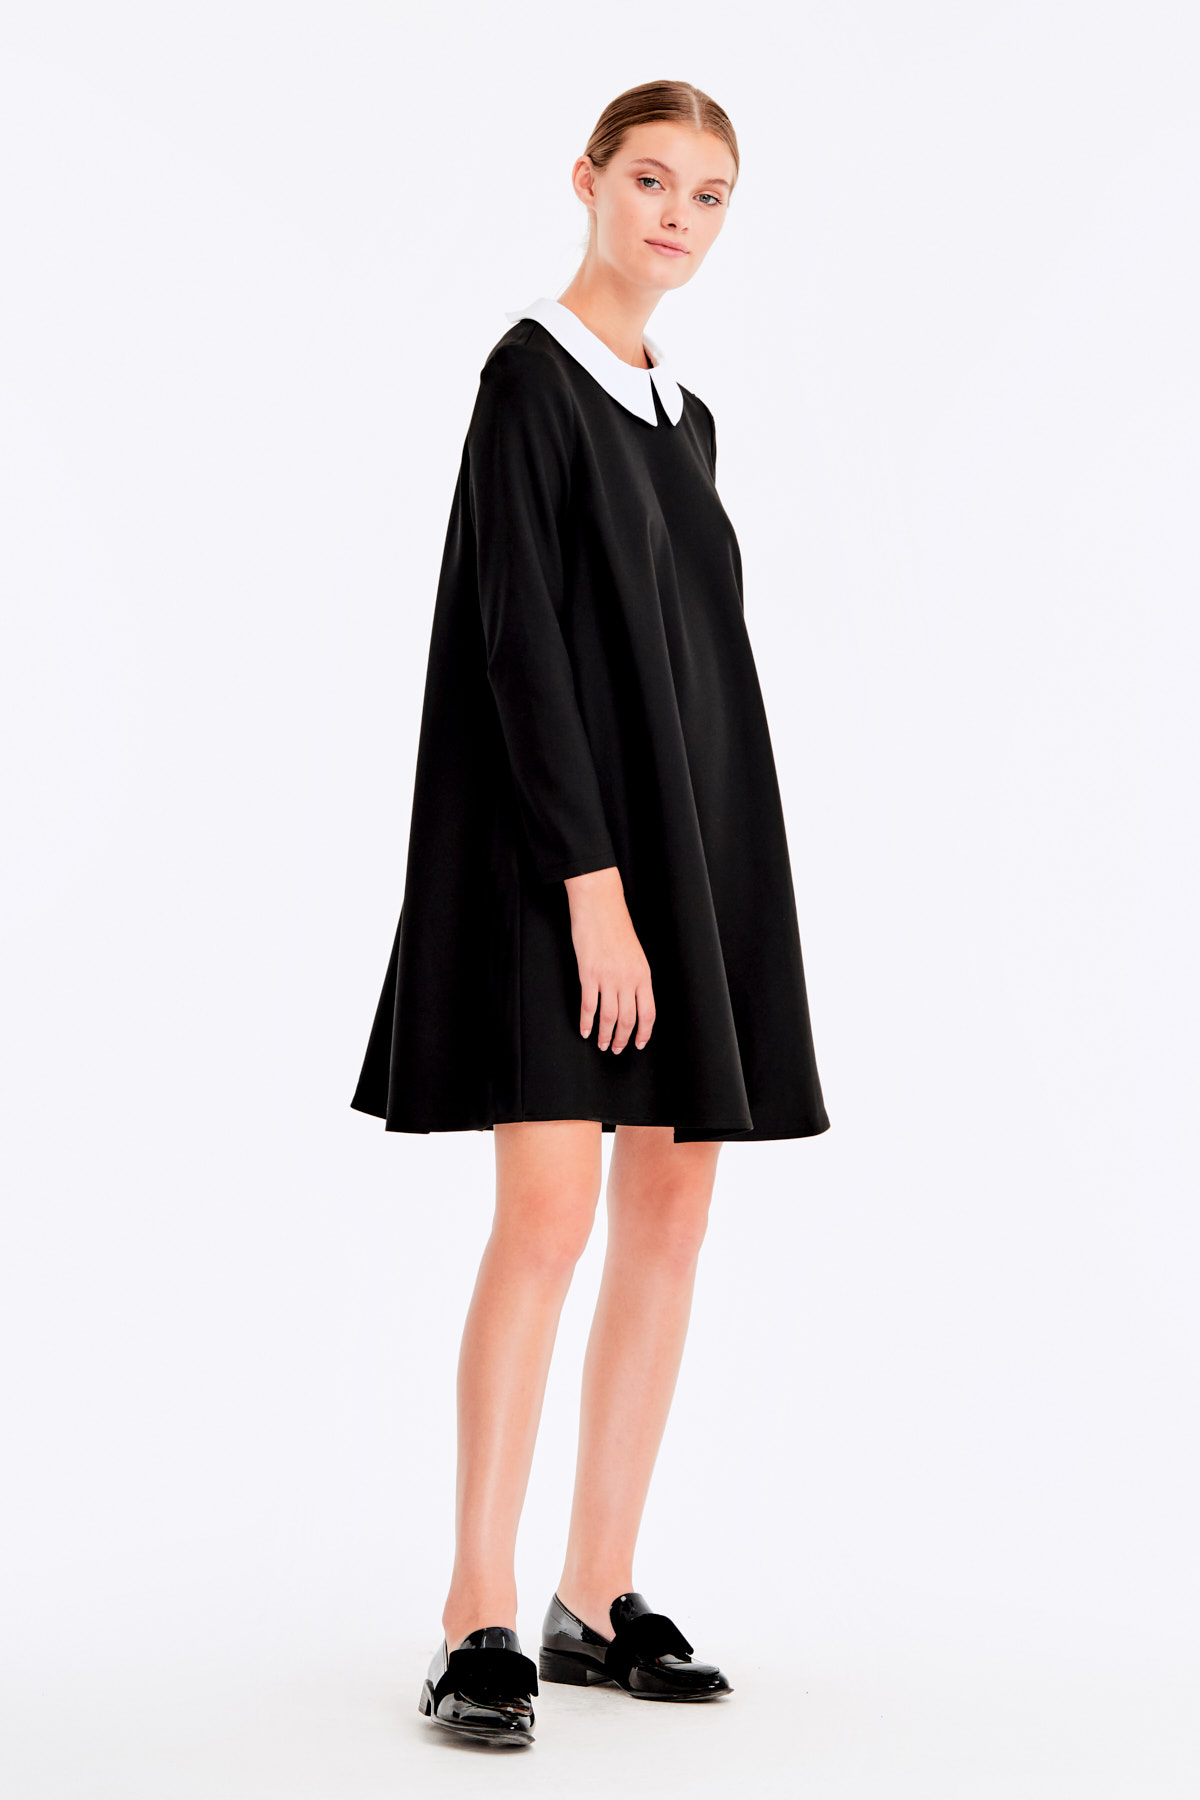 Loose-fitting black dress with a white collar , photo 4